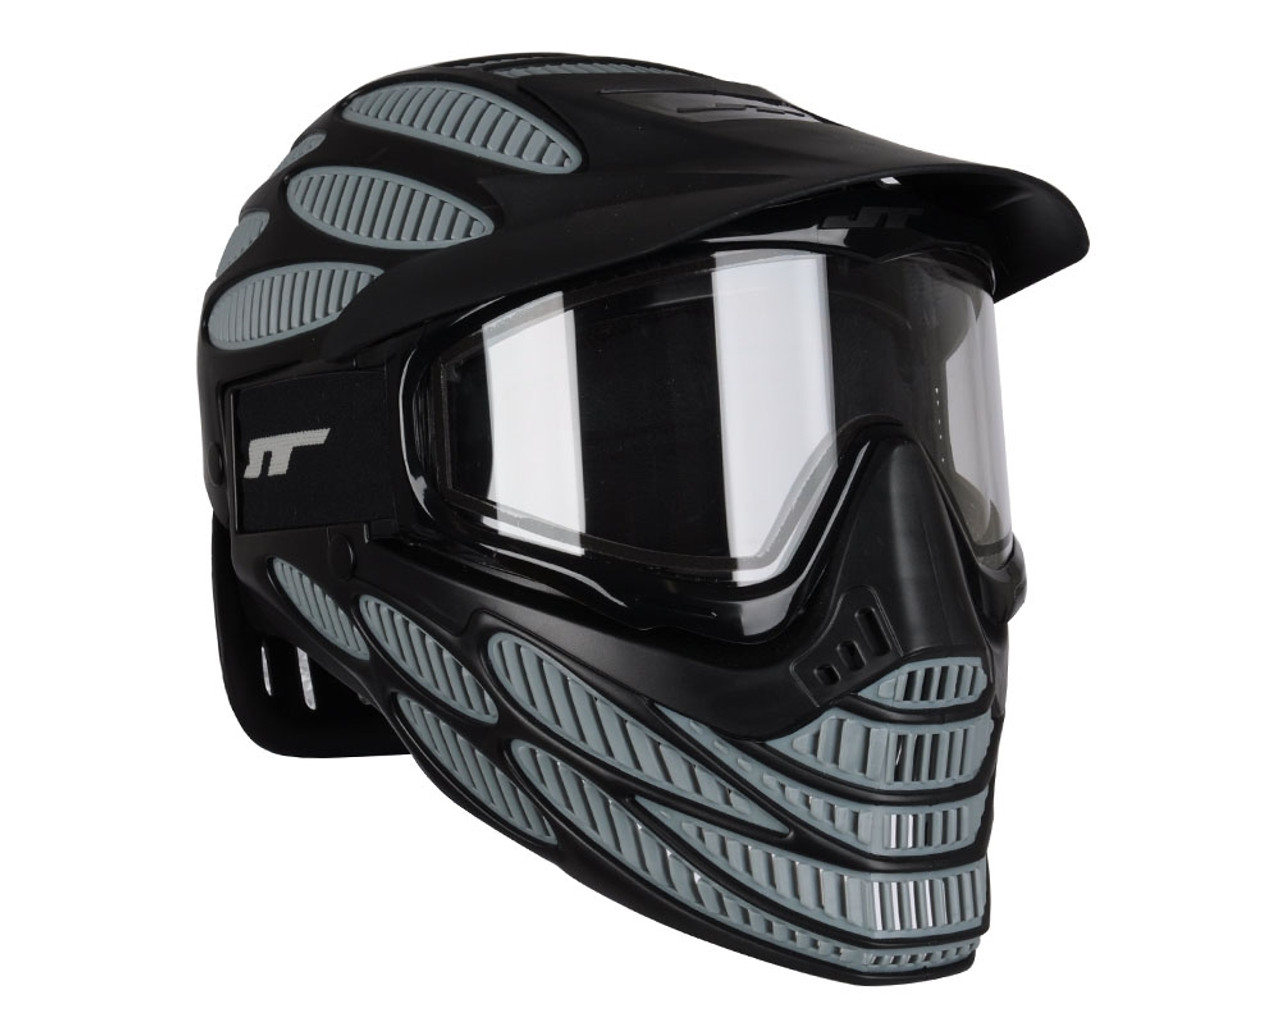 JT Proflex - Special Edition Thermal Masks – Just Paintball